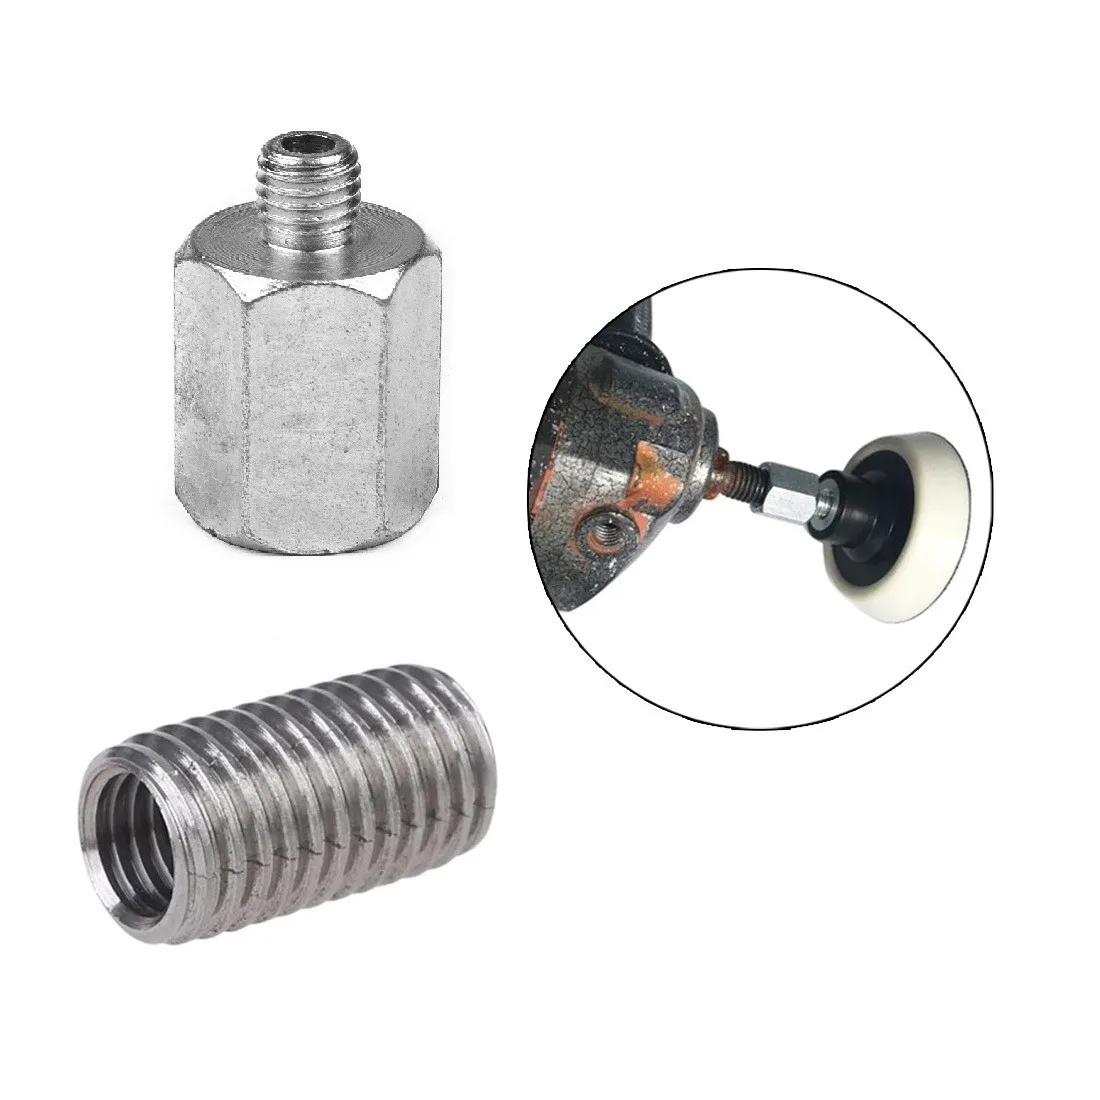 M10 M14 Adapter Angle Grinder Polisher Thread Drill Bit Interface Converter Polishing Power Tools Metal Connector Joint